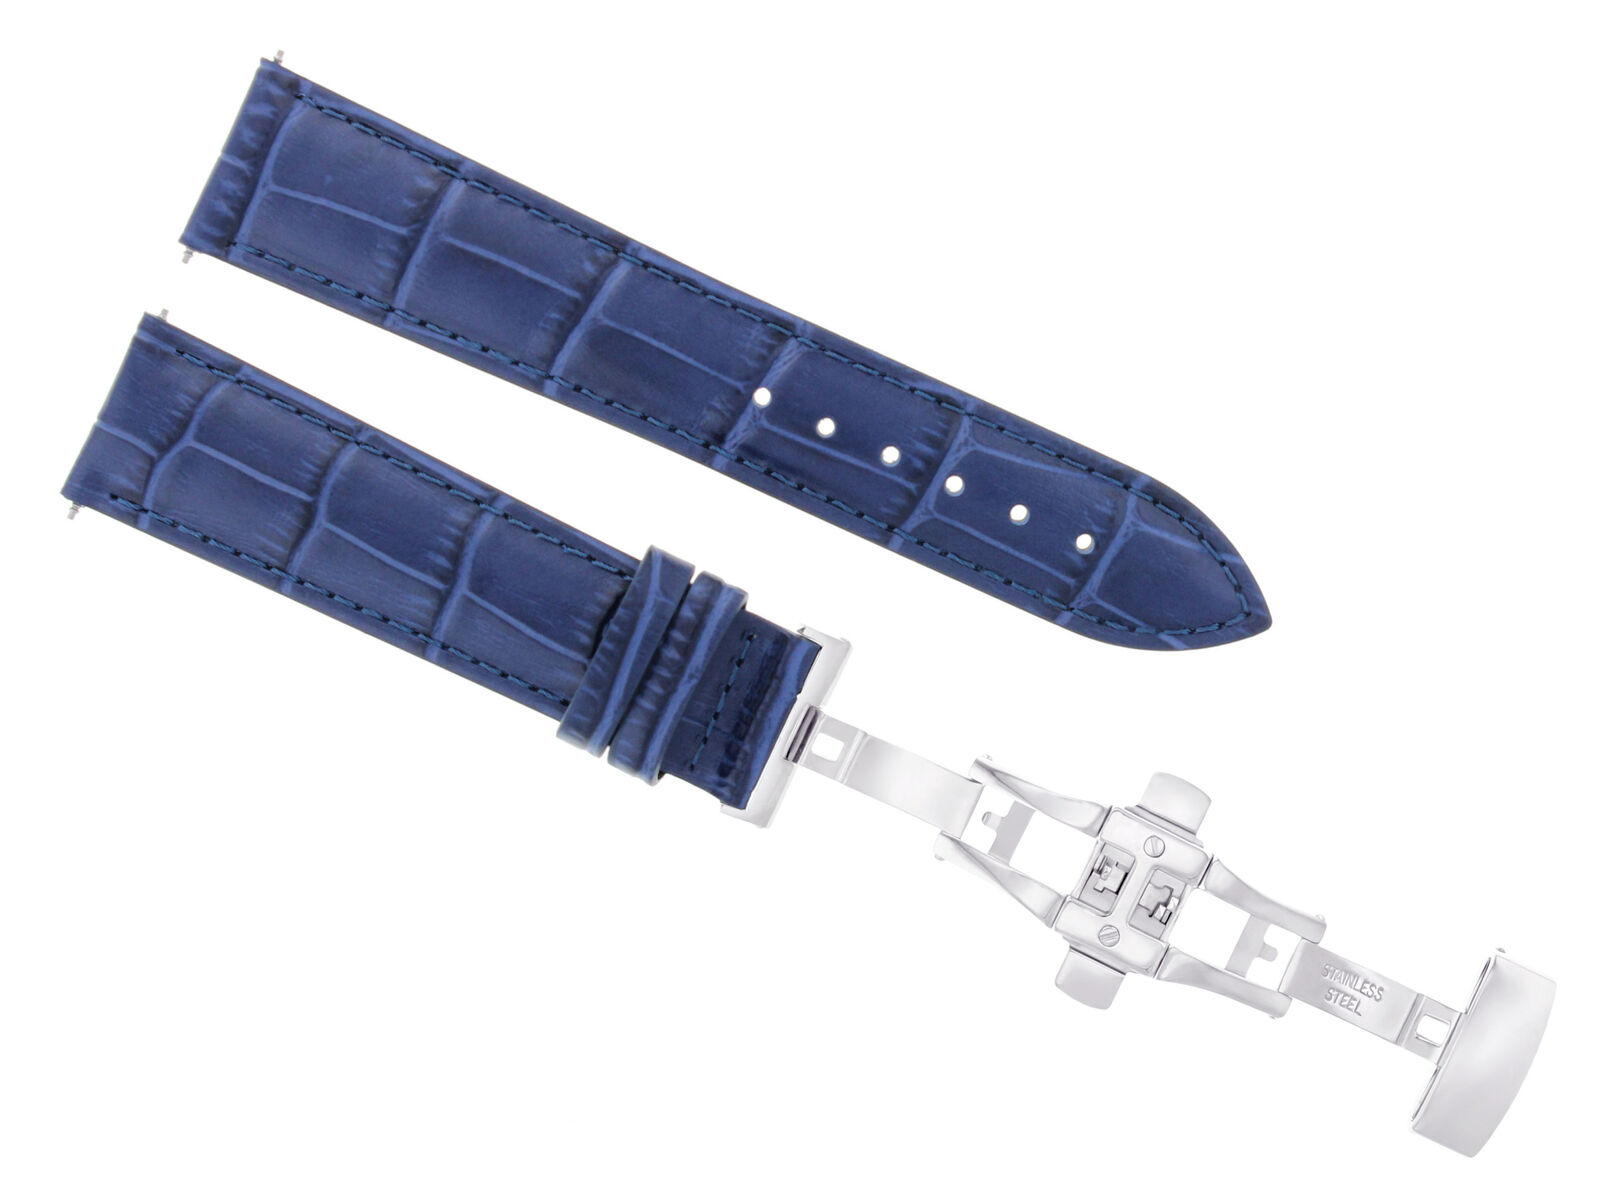 18MM LEATHER WATCH BAND STRAP FOR ORIS WATCH BUTTERFLY DEPLOYMENT CLASP BLUE